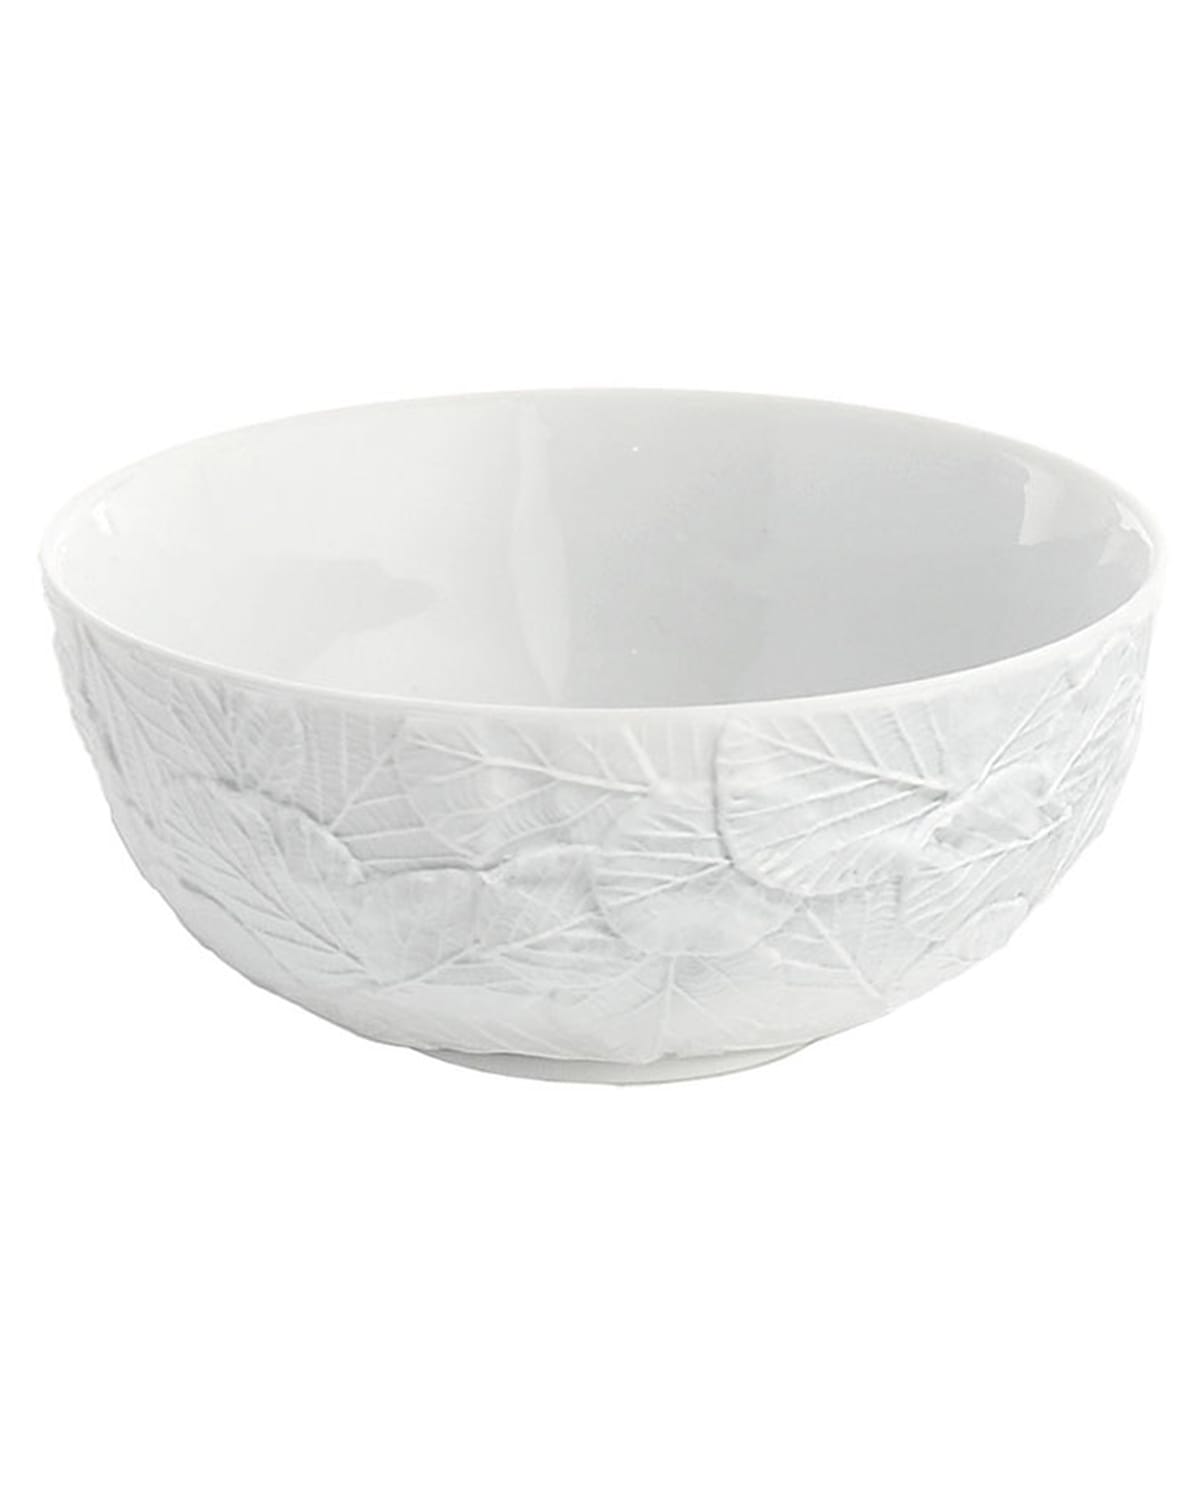 Forest Leaf All-Purpose Bowl